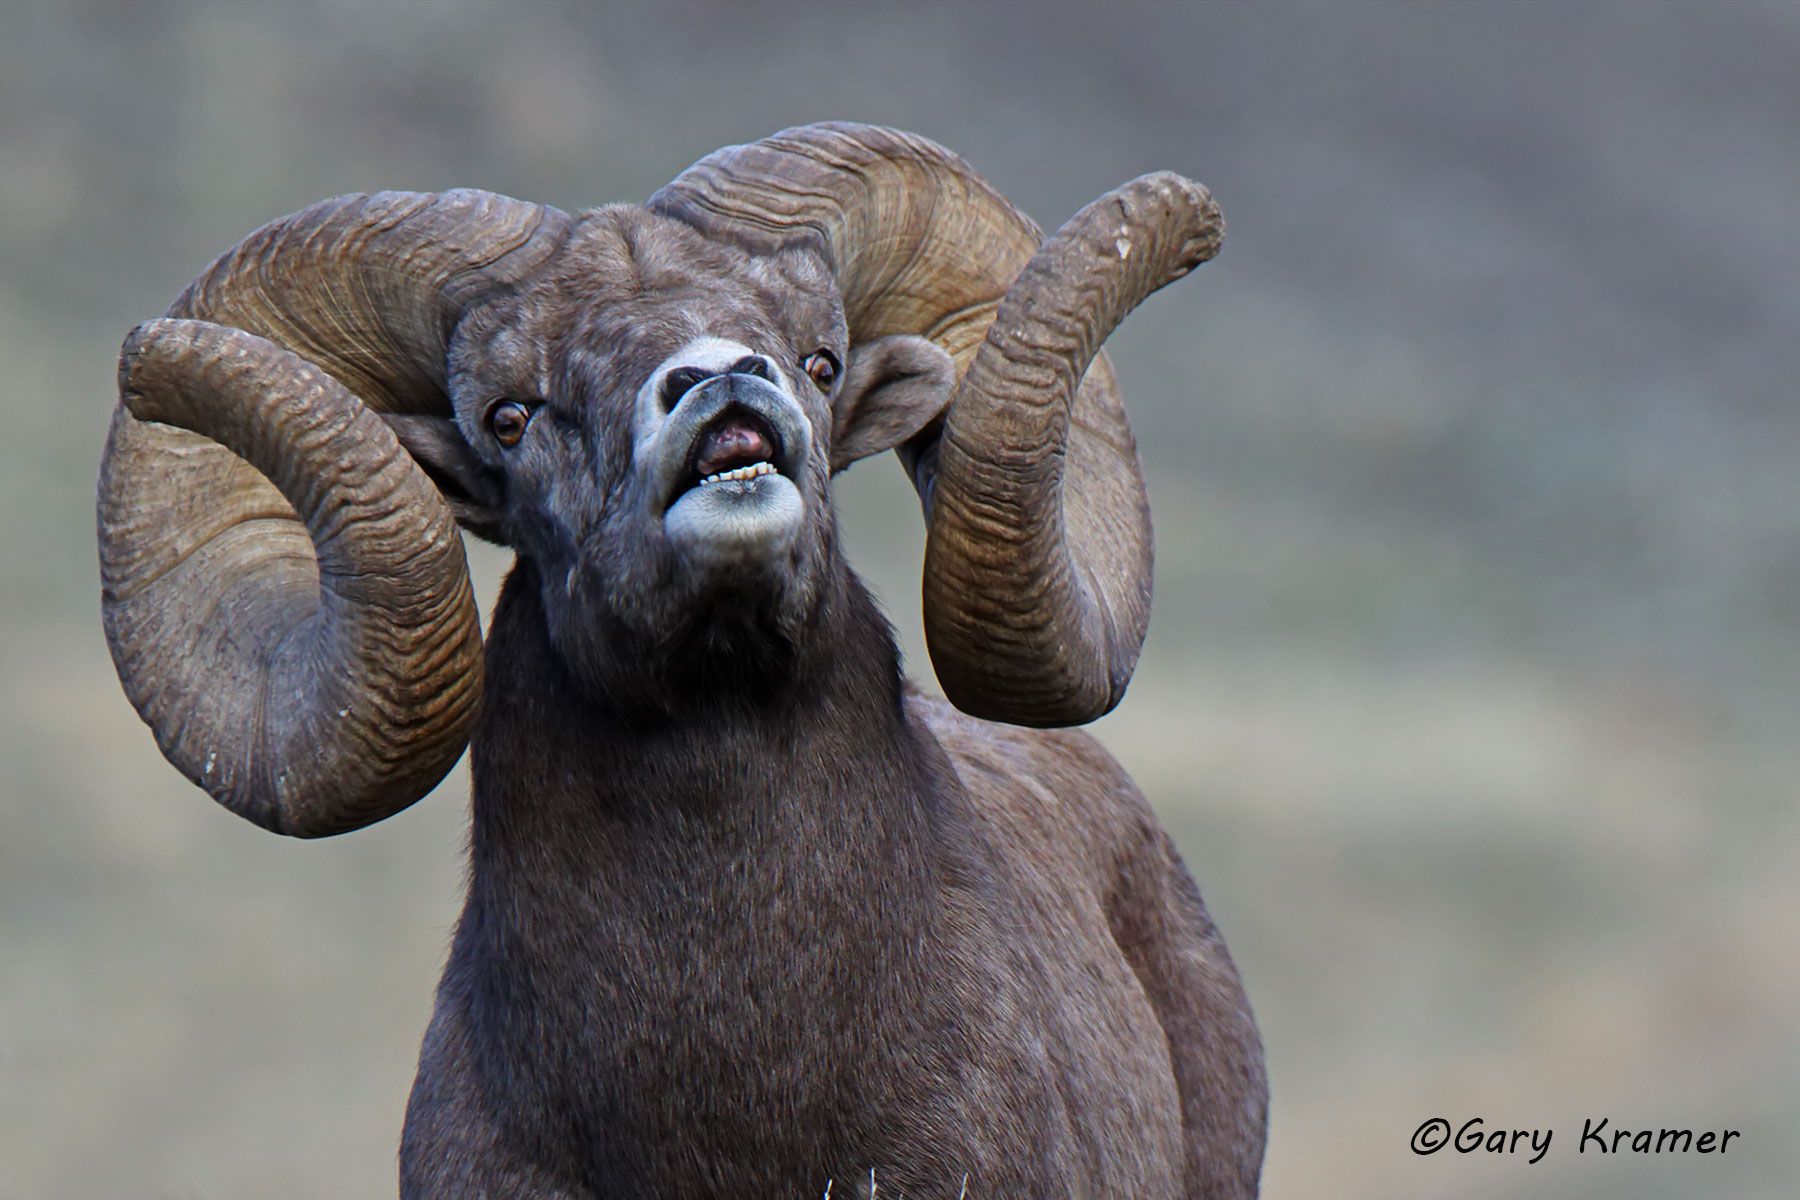 Rocky Mountain Bighorn (Ovis canadensis canadensis) - NMSBr#1365d